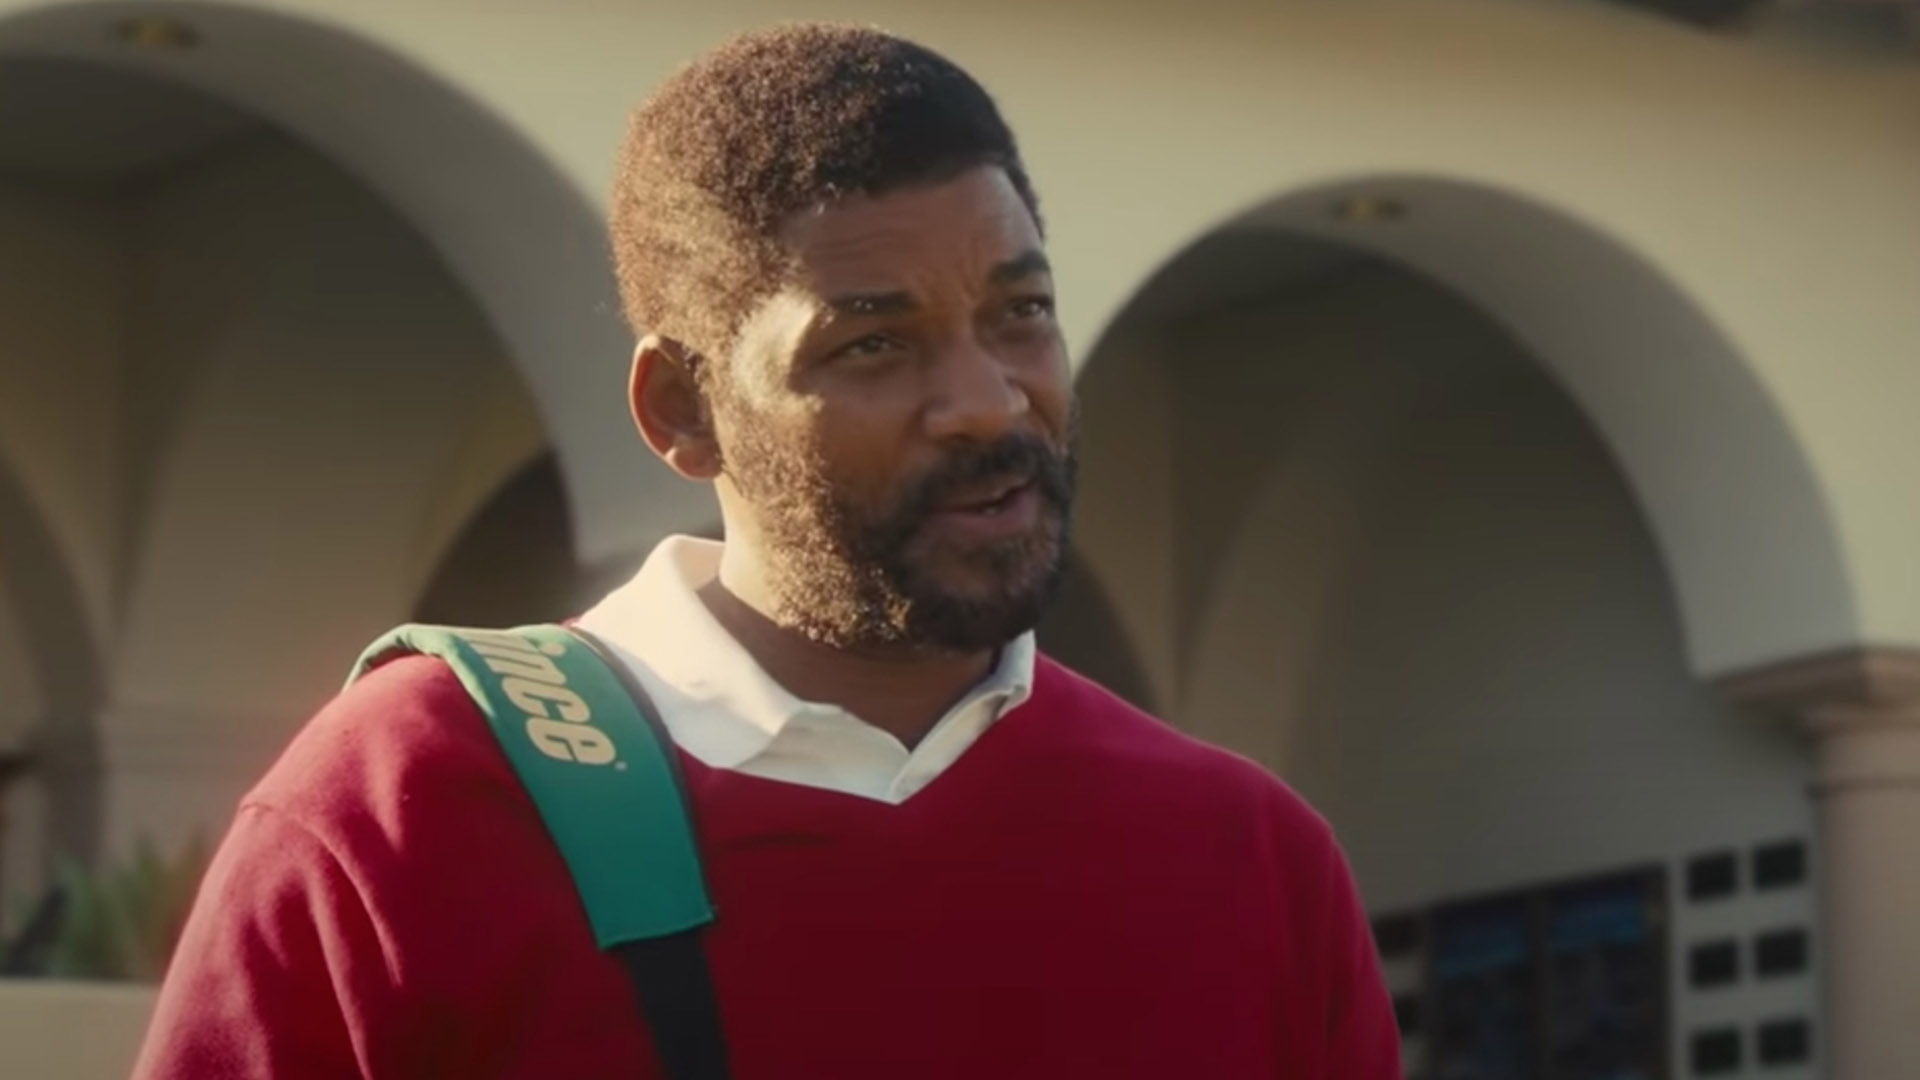 Will Smith in a red sweater in the movie King Richard